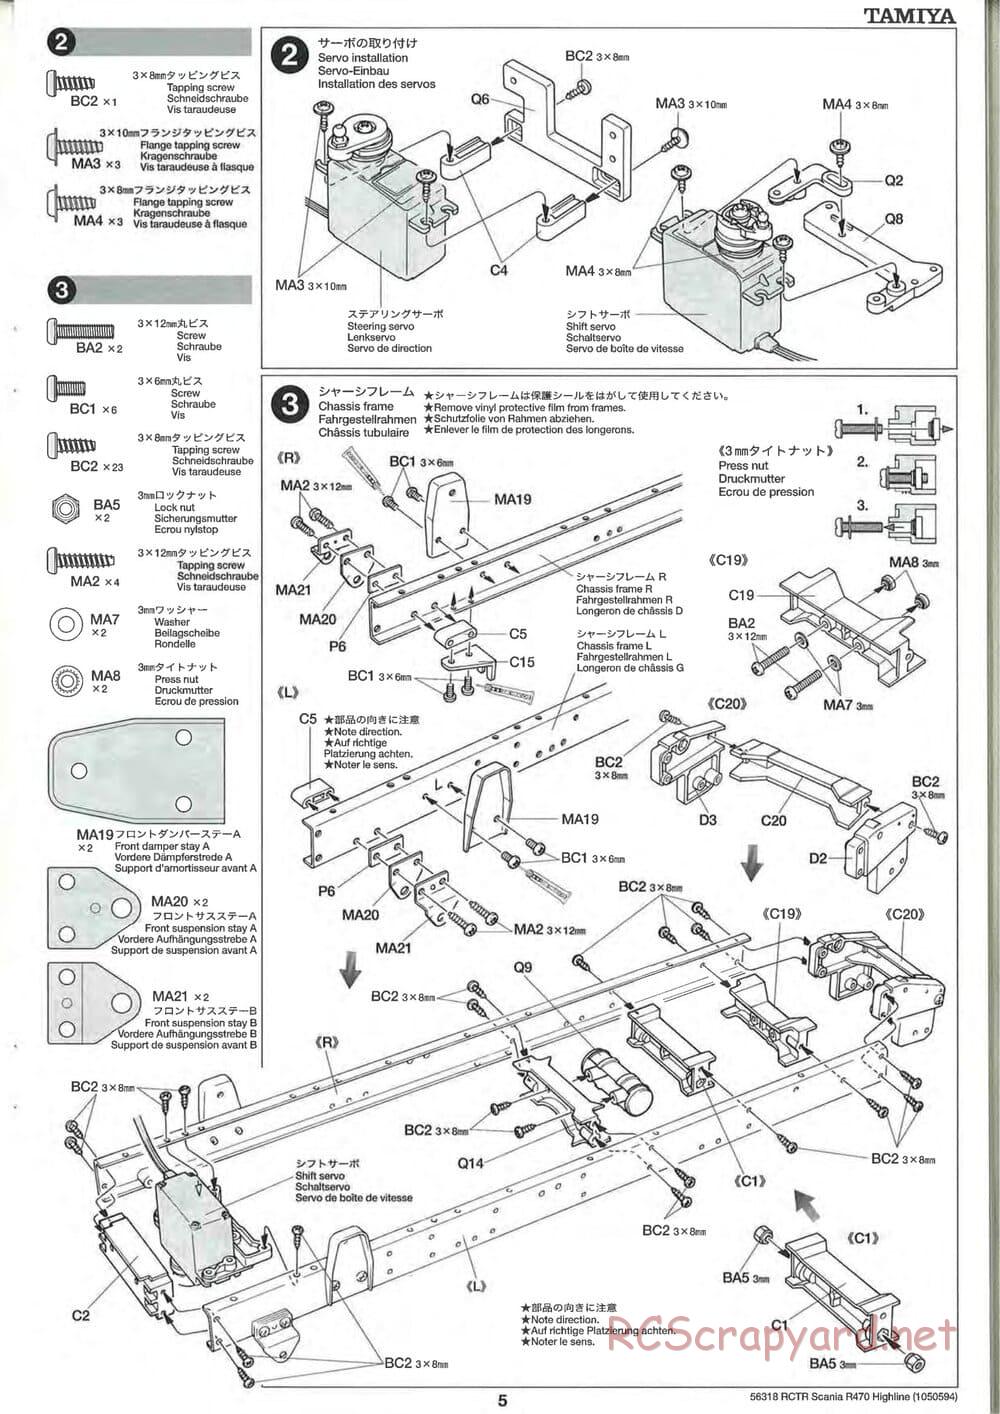 Tamiya - Scania R470 Highline Tractor Truck Chassis - Manual - Page 5